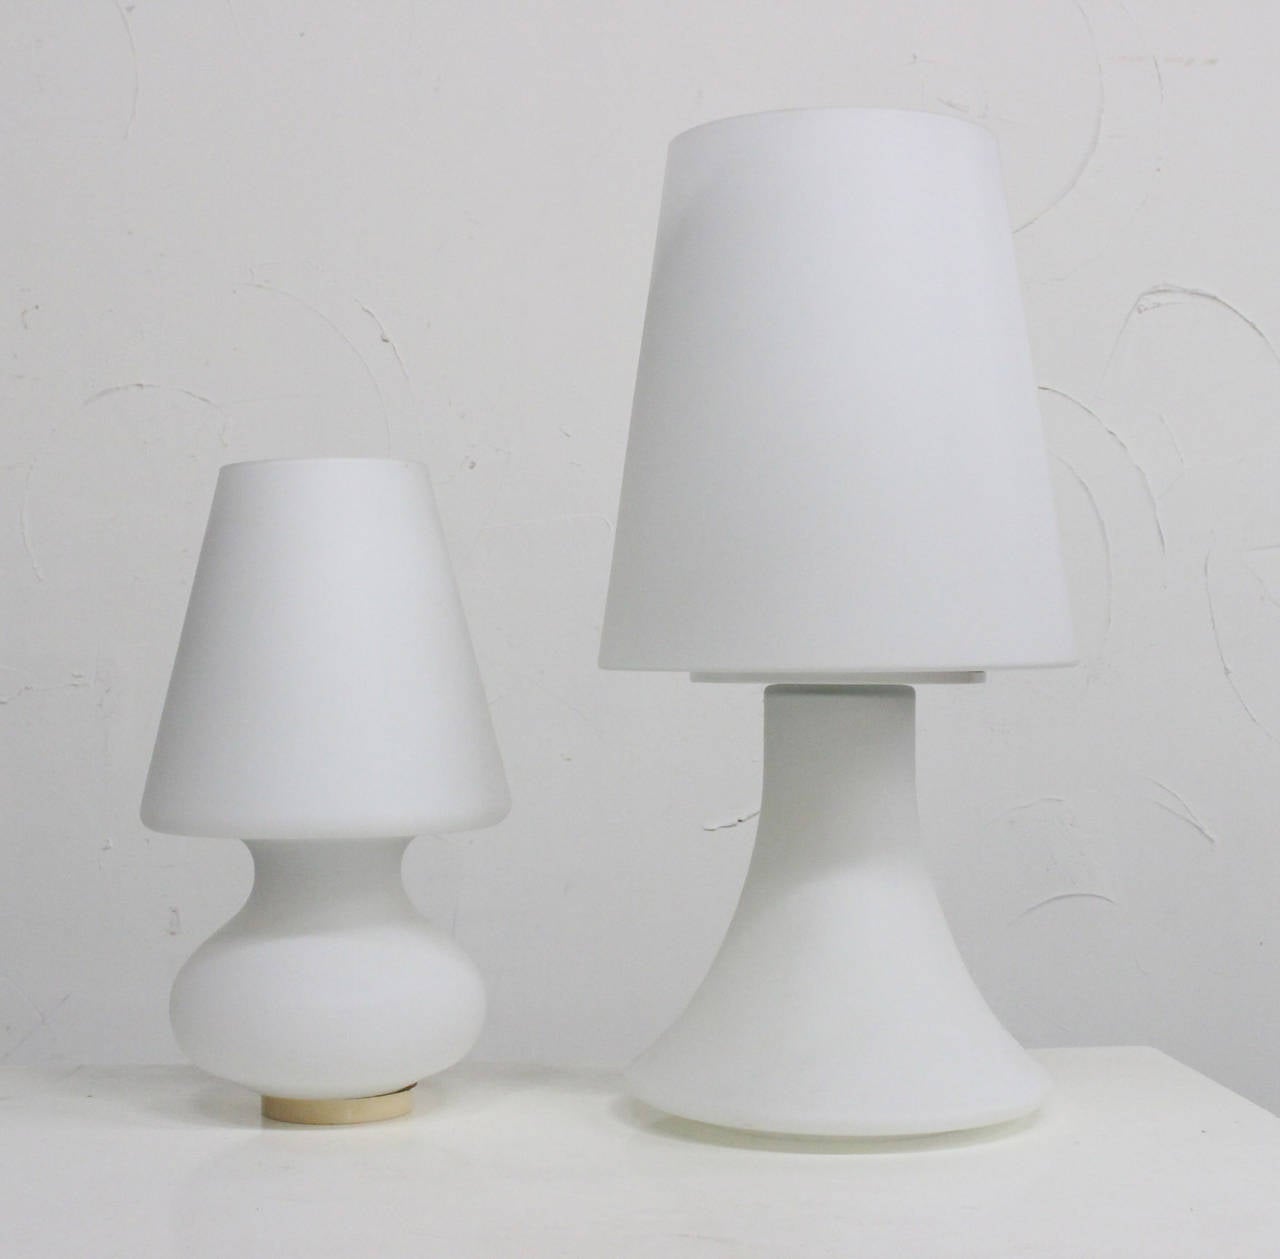 Pair of white glass modern lamps by Laurel, circa 1960s. 

Dimensions:
11